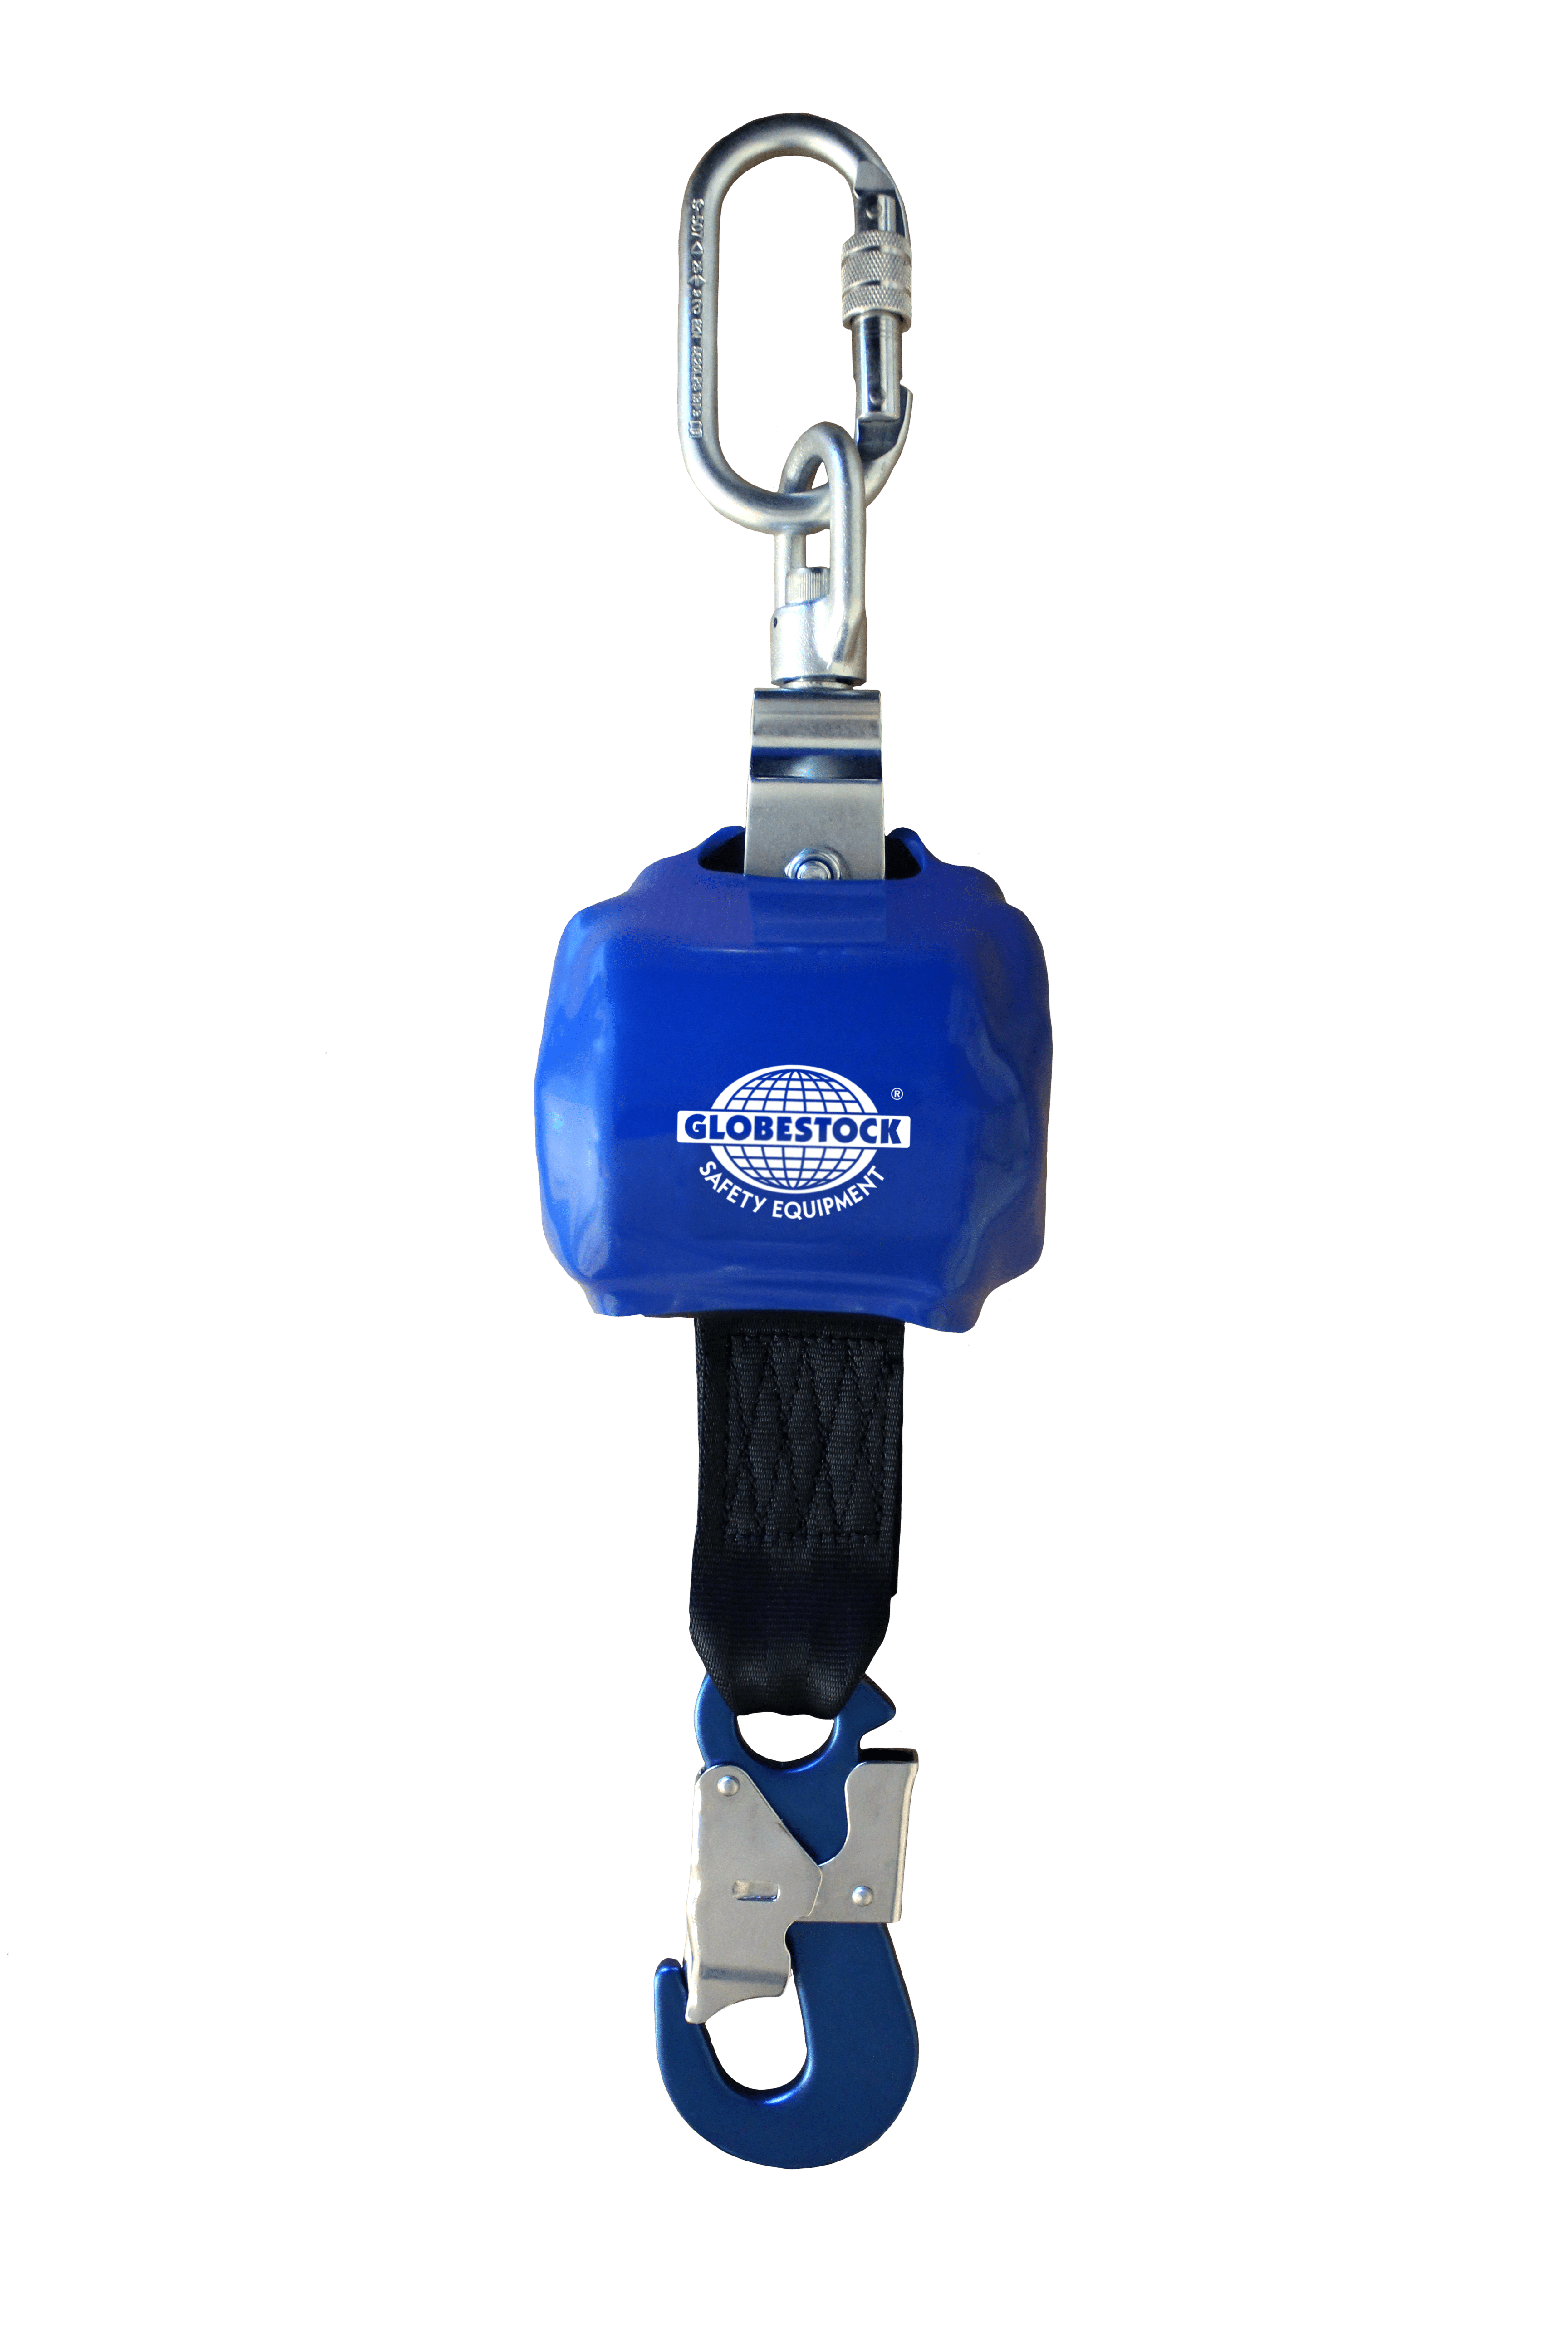 Globestock G.AutoReel 2.5m Compact Fall Arrest Block with Oval Carabiner GSE1050 - SecureHeights